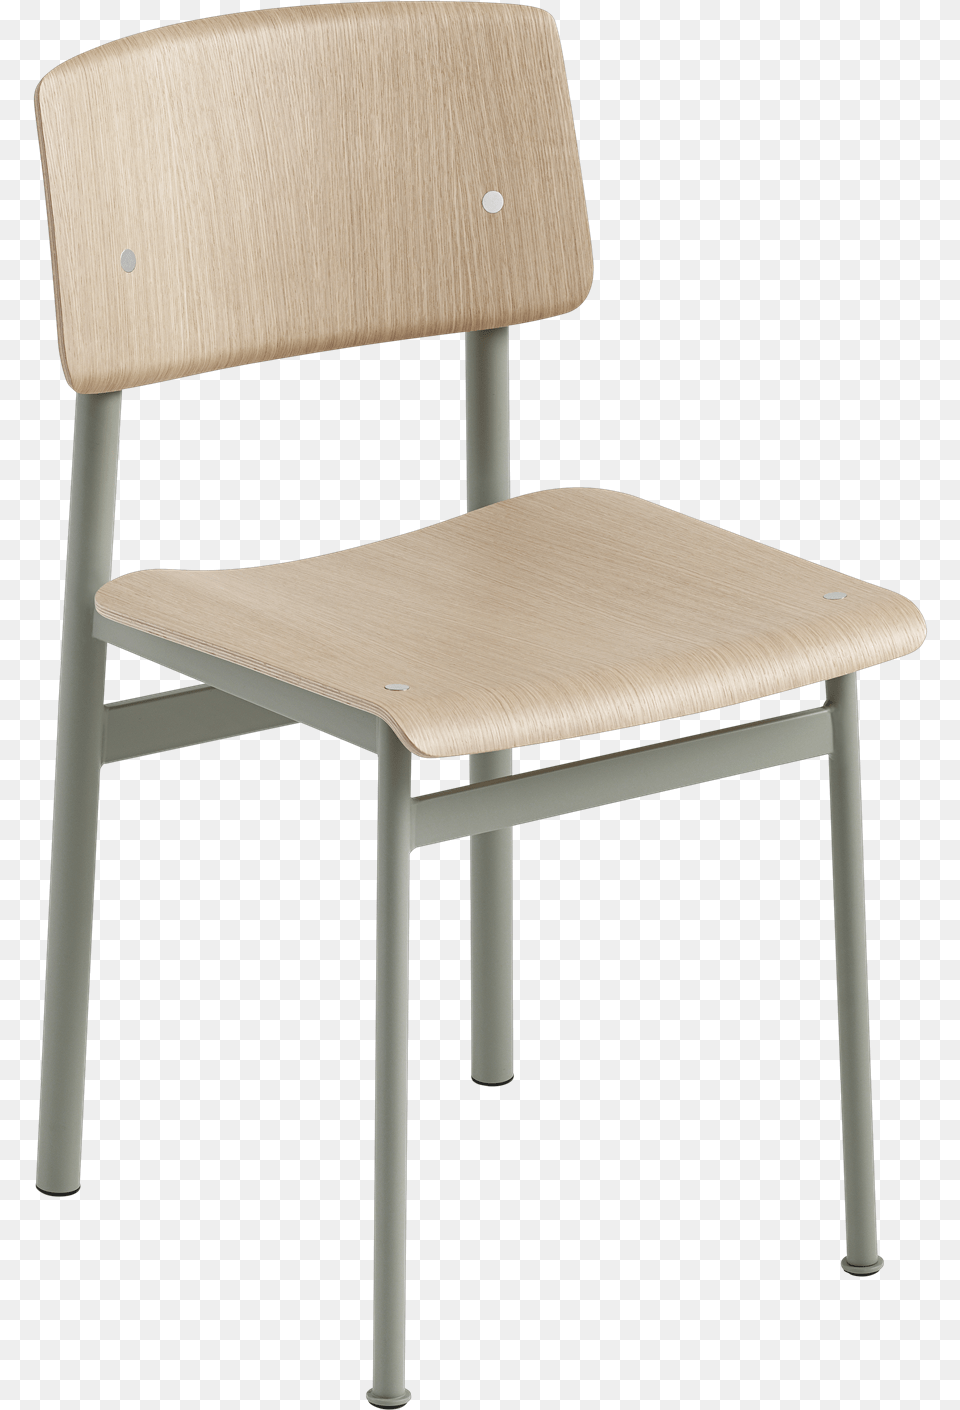 Loft Chair Master Loft Chair Muuto Loft Chair, Furniture, Plywood, Wood Png